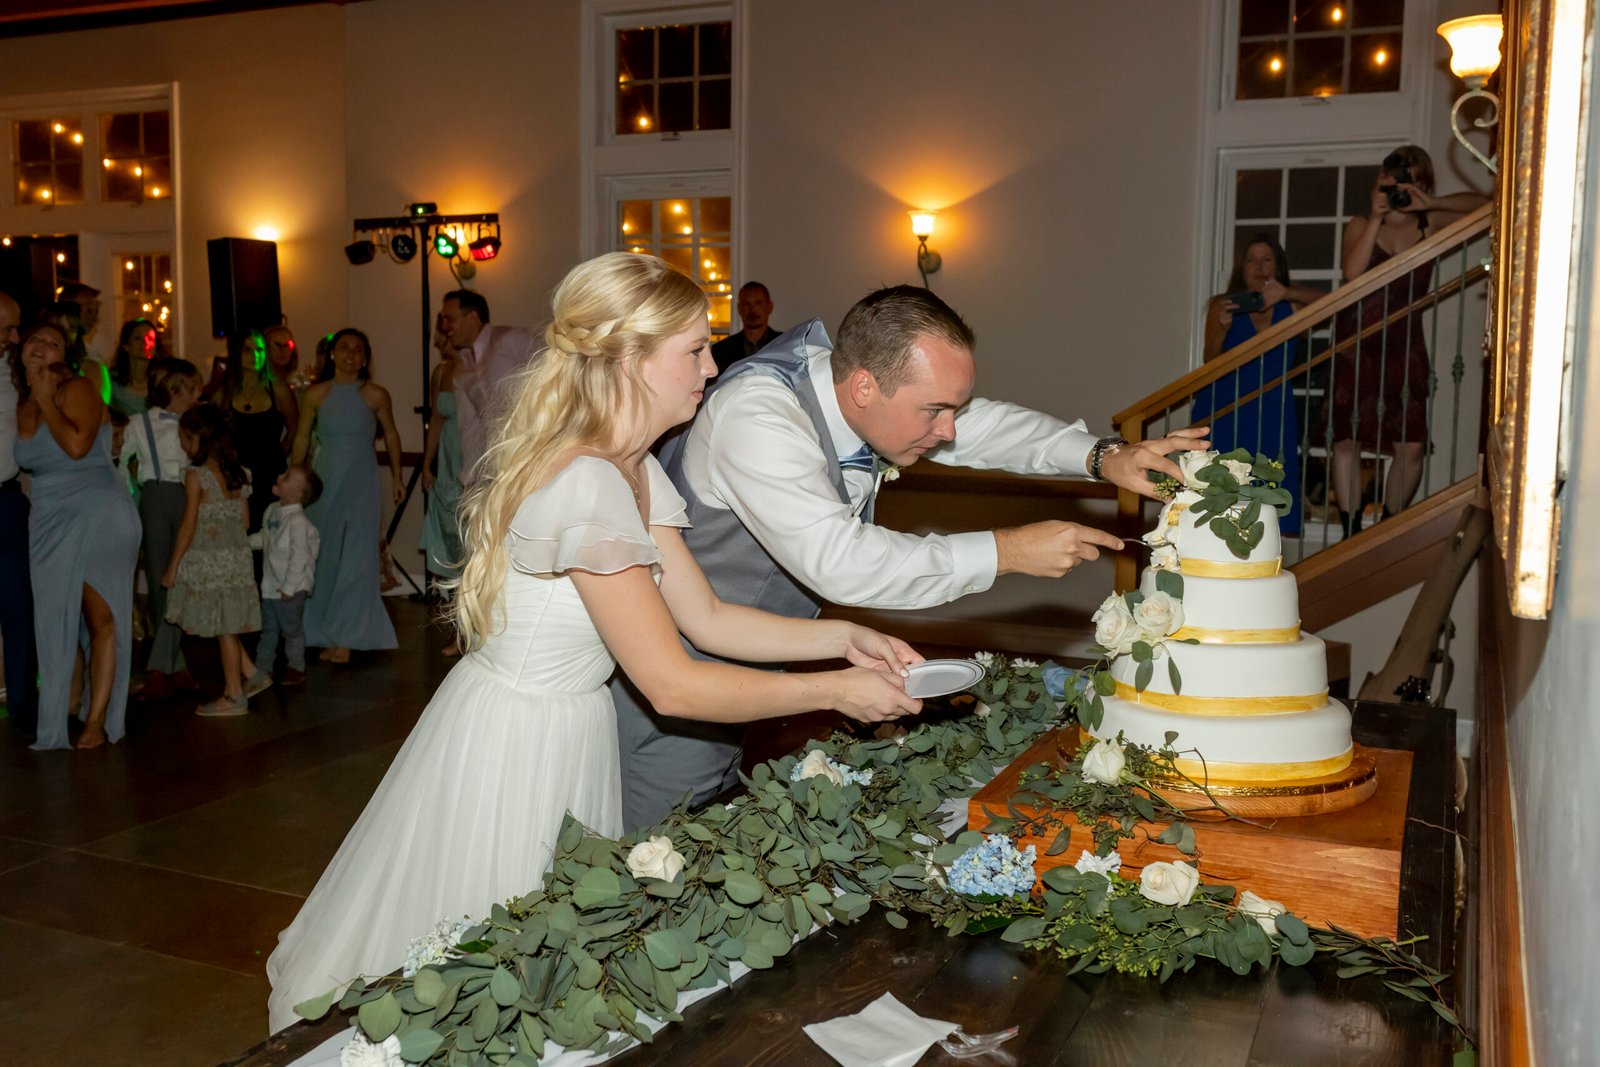 bride and groom cutting the wedding cake